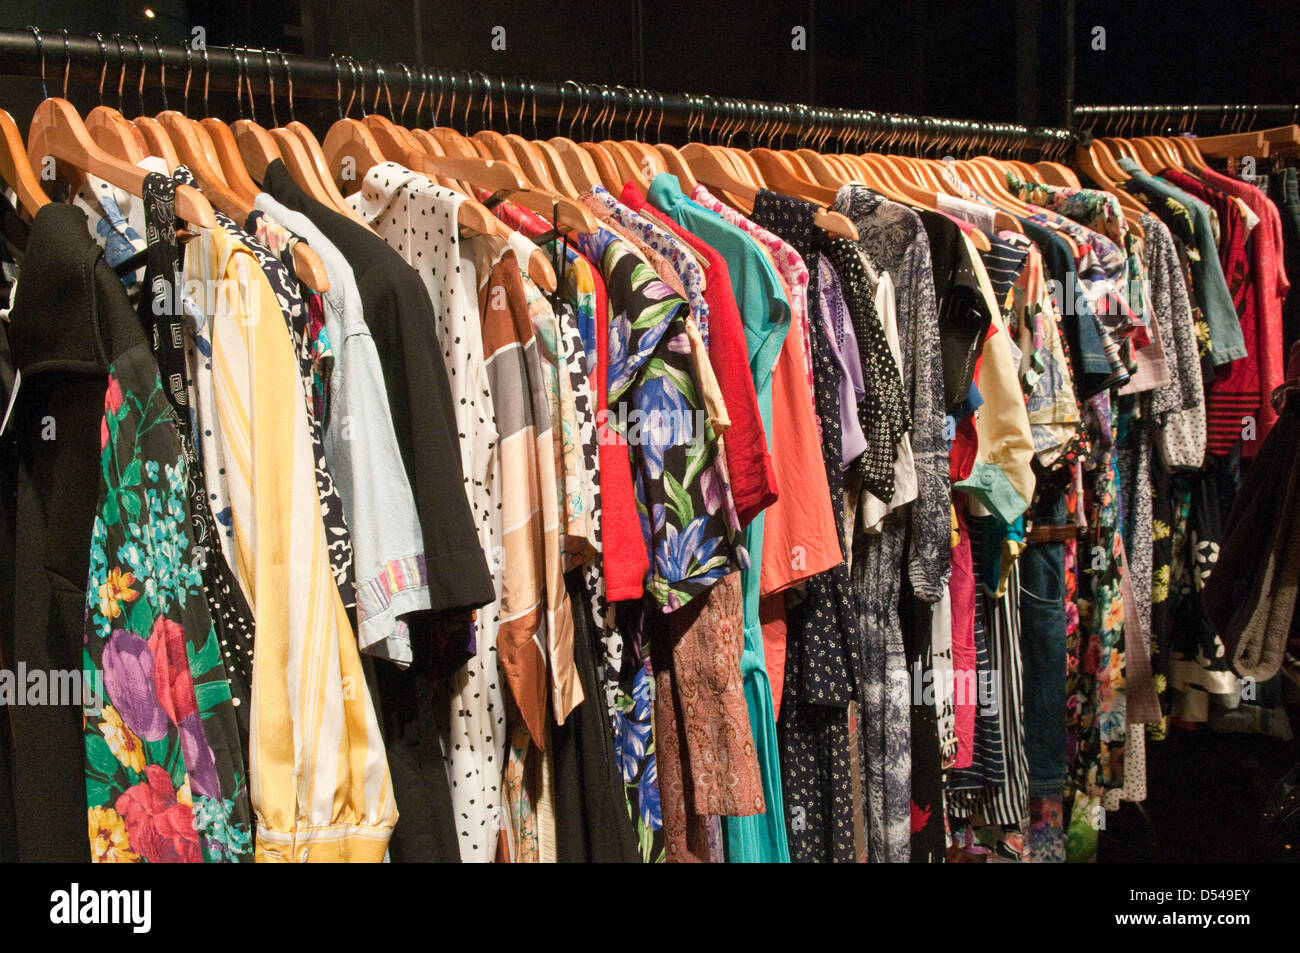 A long clothes rail packed with colurful patterned second hand vintage  dresses at a retro, vintage clothes fair Stock Photo - Alamy